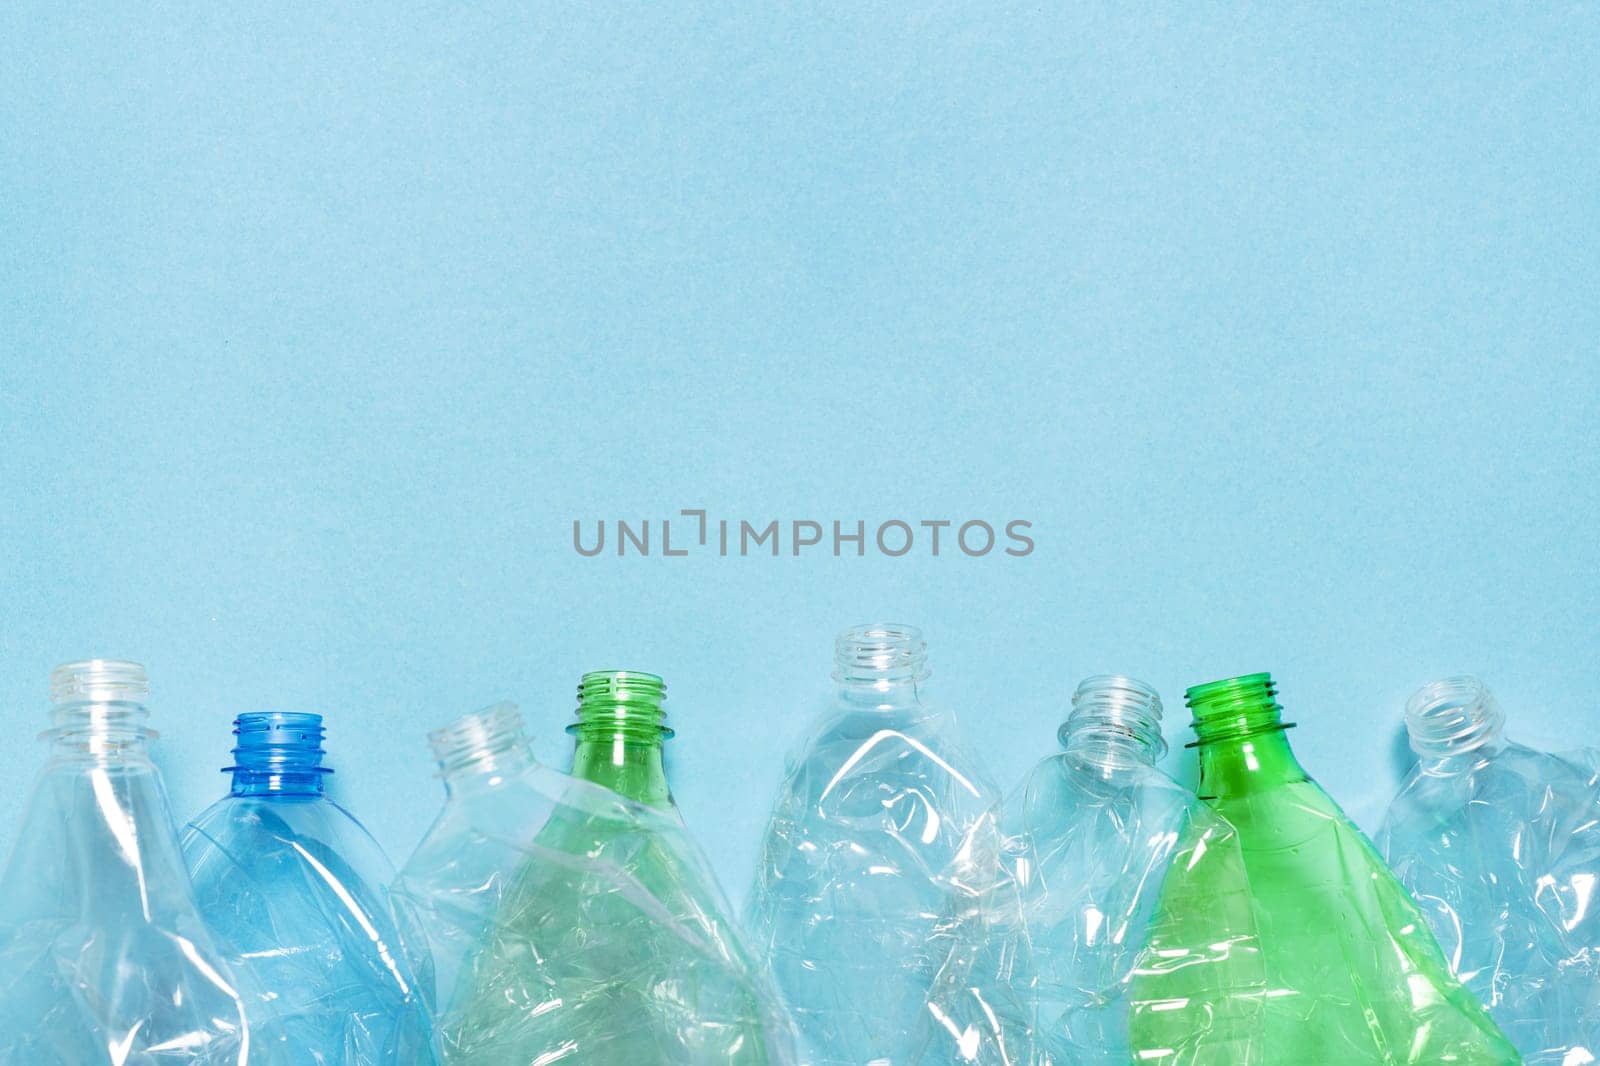 Flat set crushed bottle crumpled plastic bottle recycling background trash plastic garbage PET recycling design blue paper. Row empty bottle PET plastic recycling concept. Reuse. Used. Waste sorting